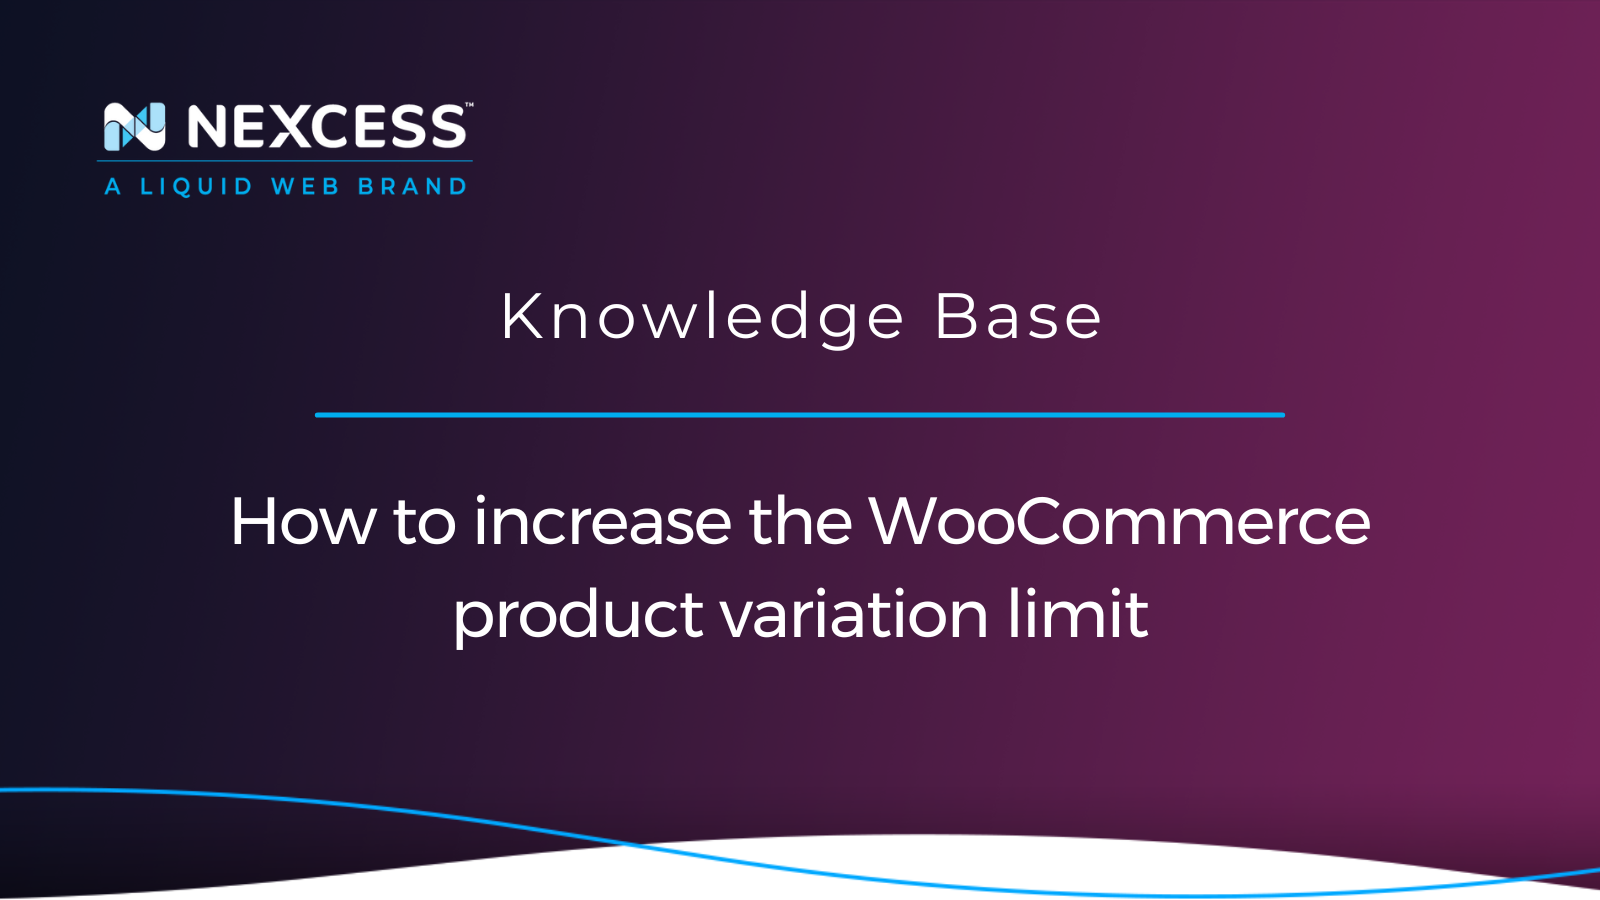 How to increase the WooCommerce product variation limit